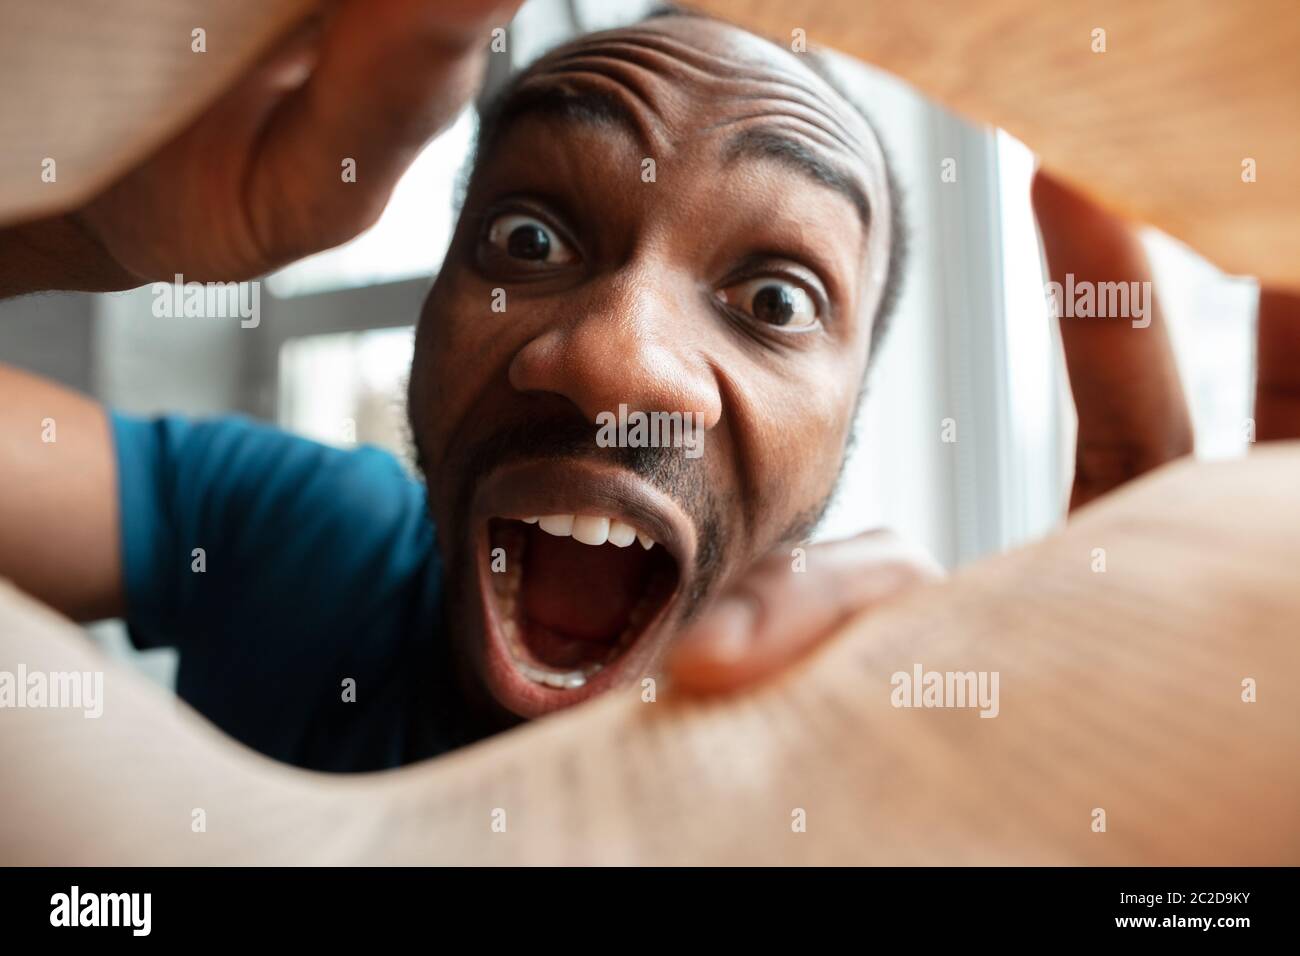 In papers, magazines, books. African-american man looking for job in unusual places at his home. Crazy, funny way to find career and going up. Concept of crisis, unemployment, finance, business. Stock Photo